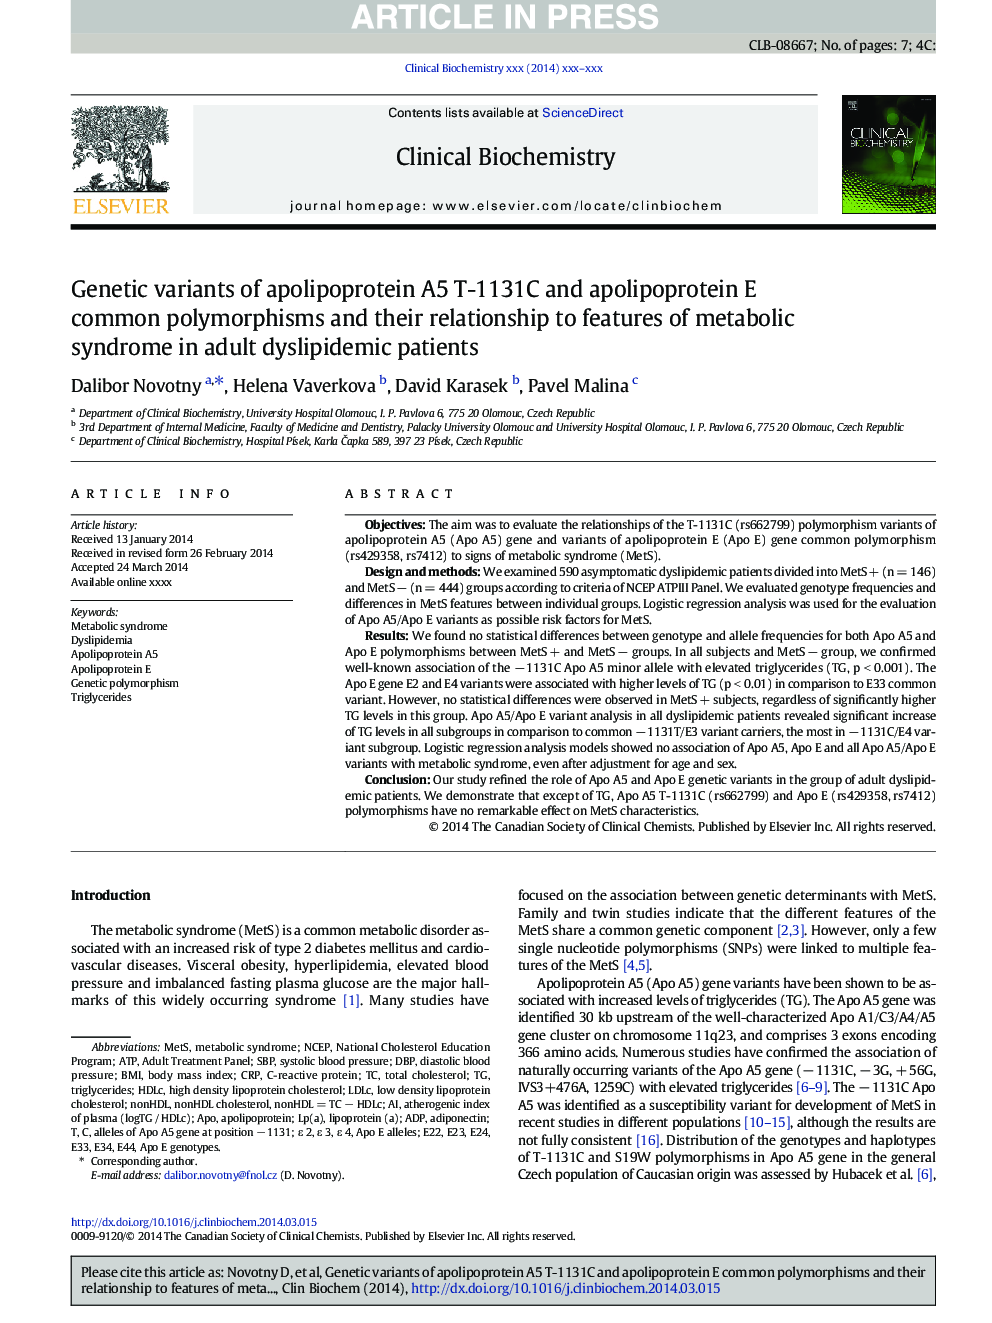 Genetic variants of apolipoprotein A5 T-1131C and apolipoprotein E common polymorphisms and their relationship to features of metabolic syndrome in adult dyslipidemic patients